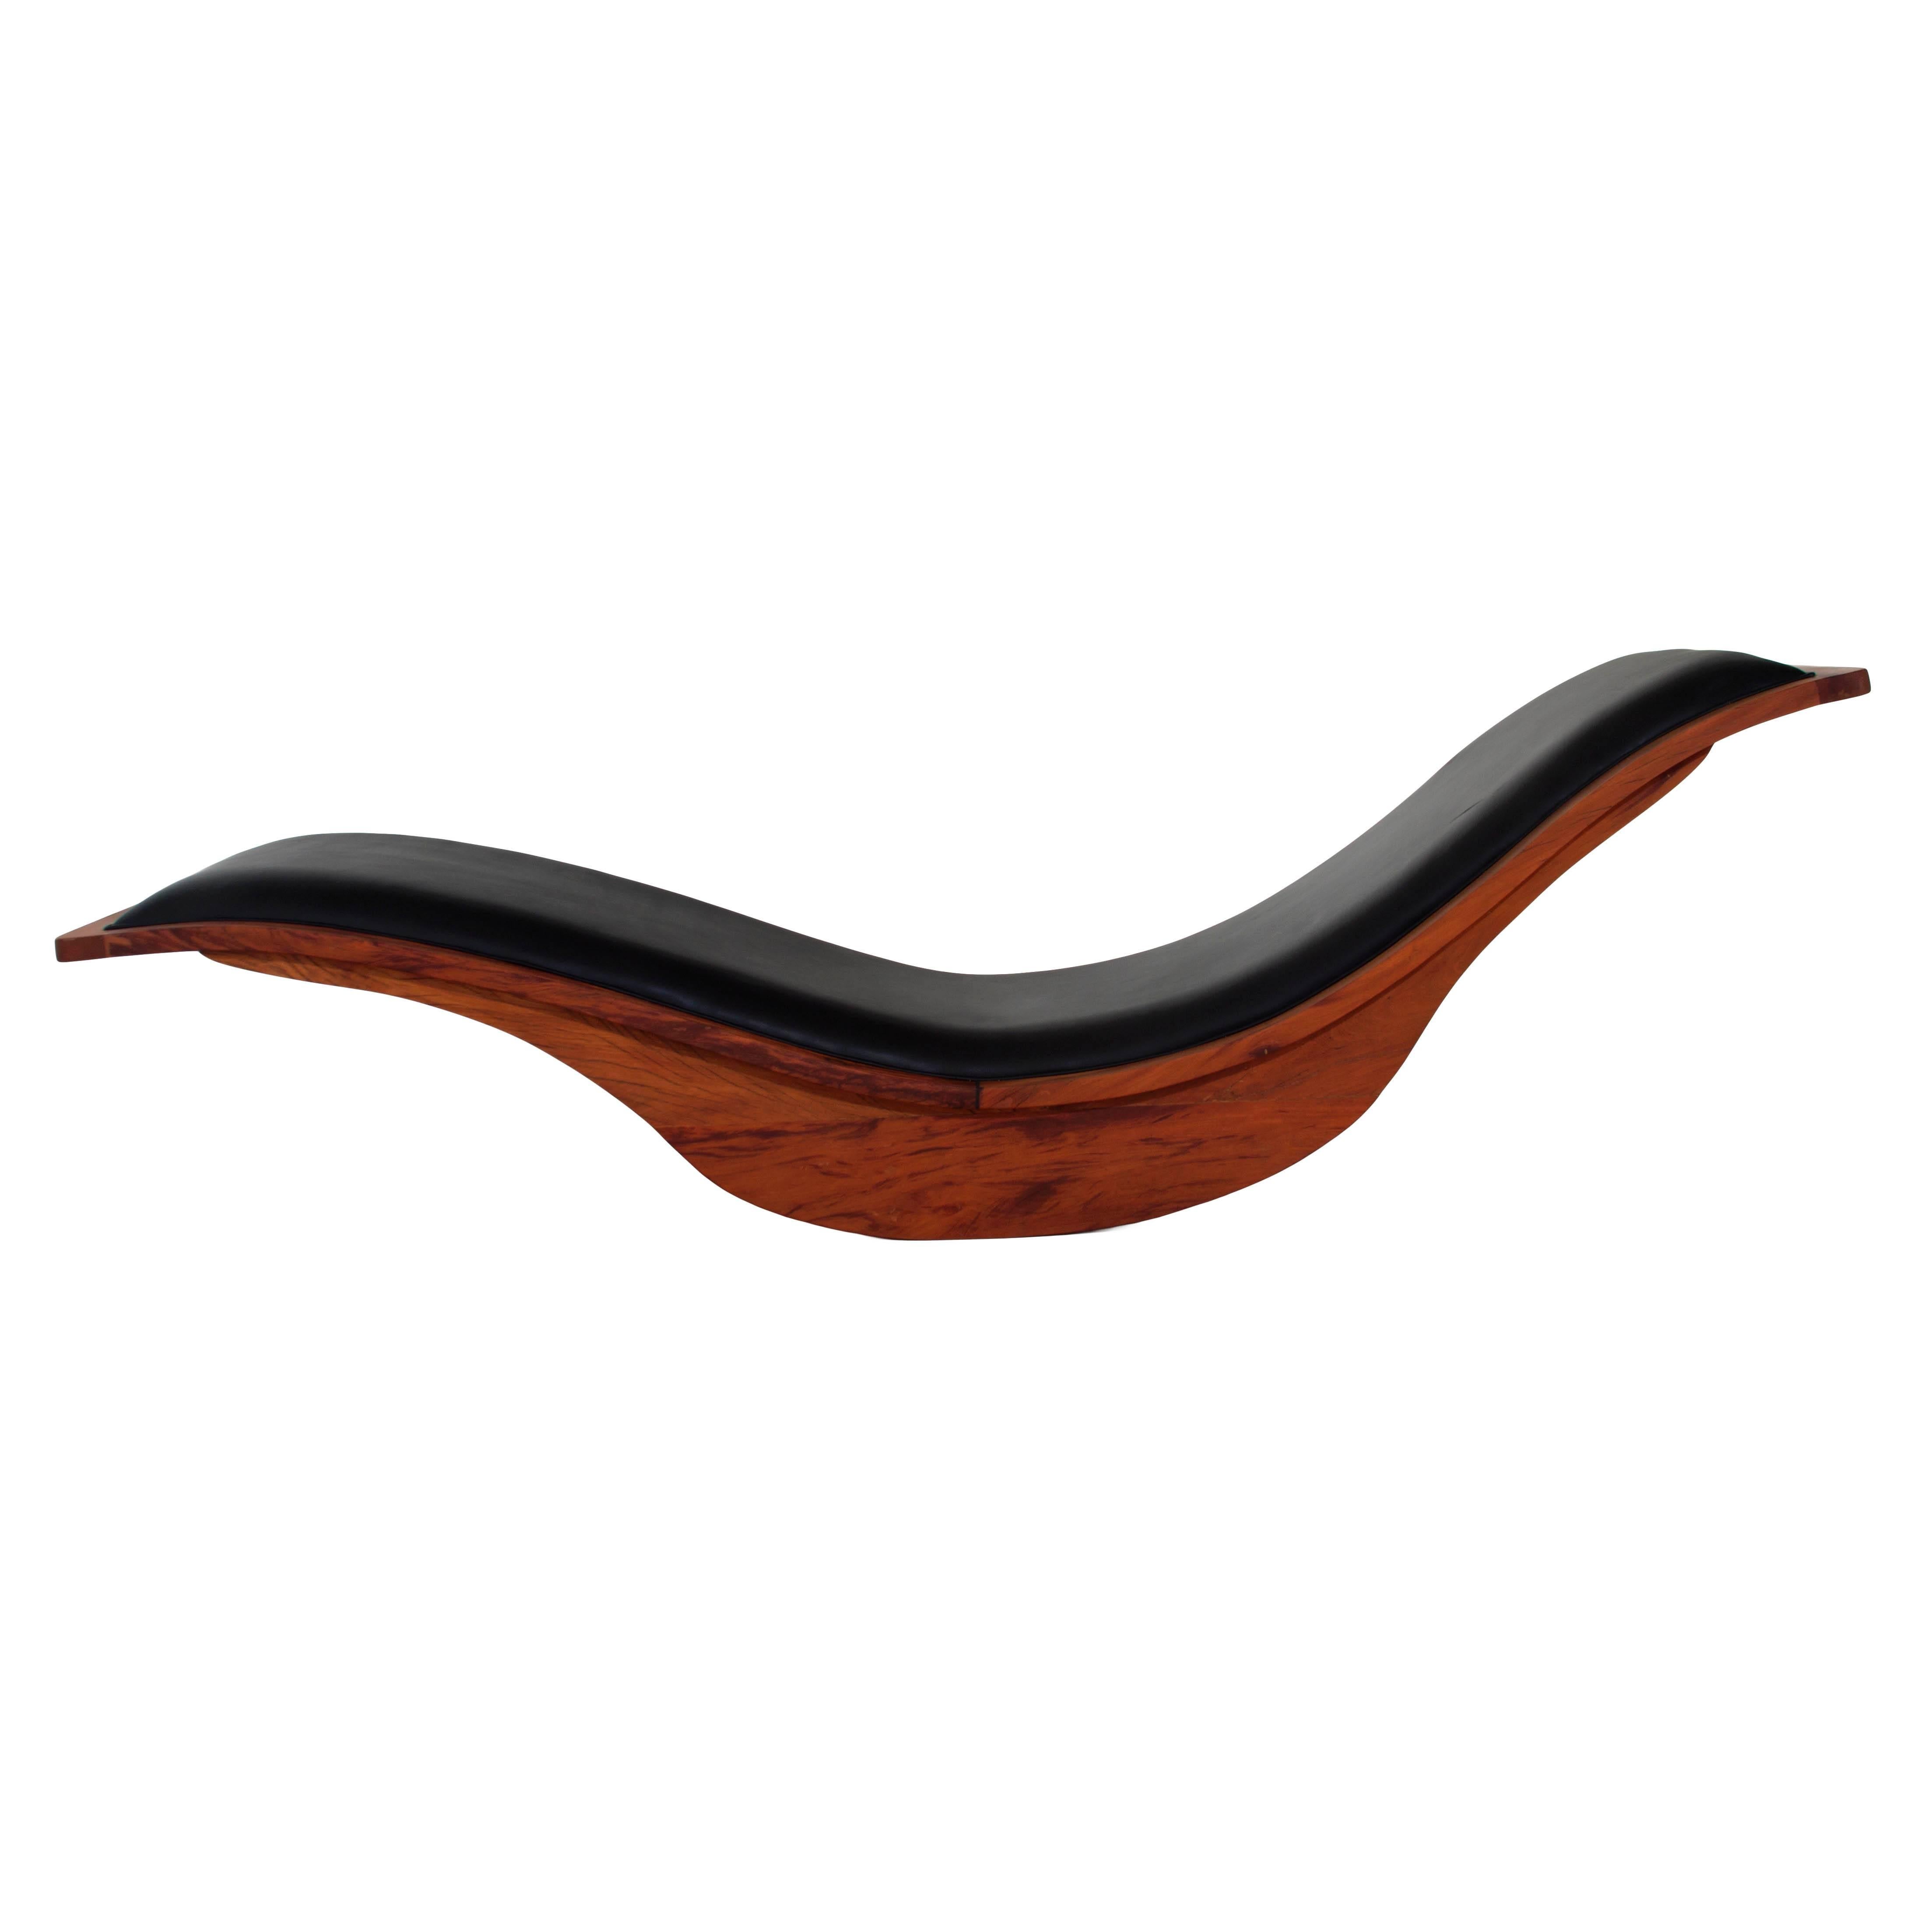 This is a swooping rocking chaise lounge composed of exotic Brazilian peroba hardwood with a smooth leather seat by Brazilian designer Igor Rodriguez. The design is sleek and incredibly comfortable.
 